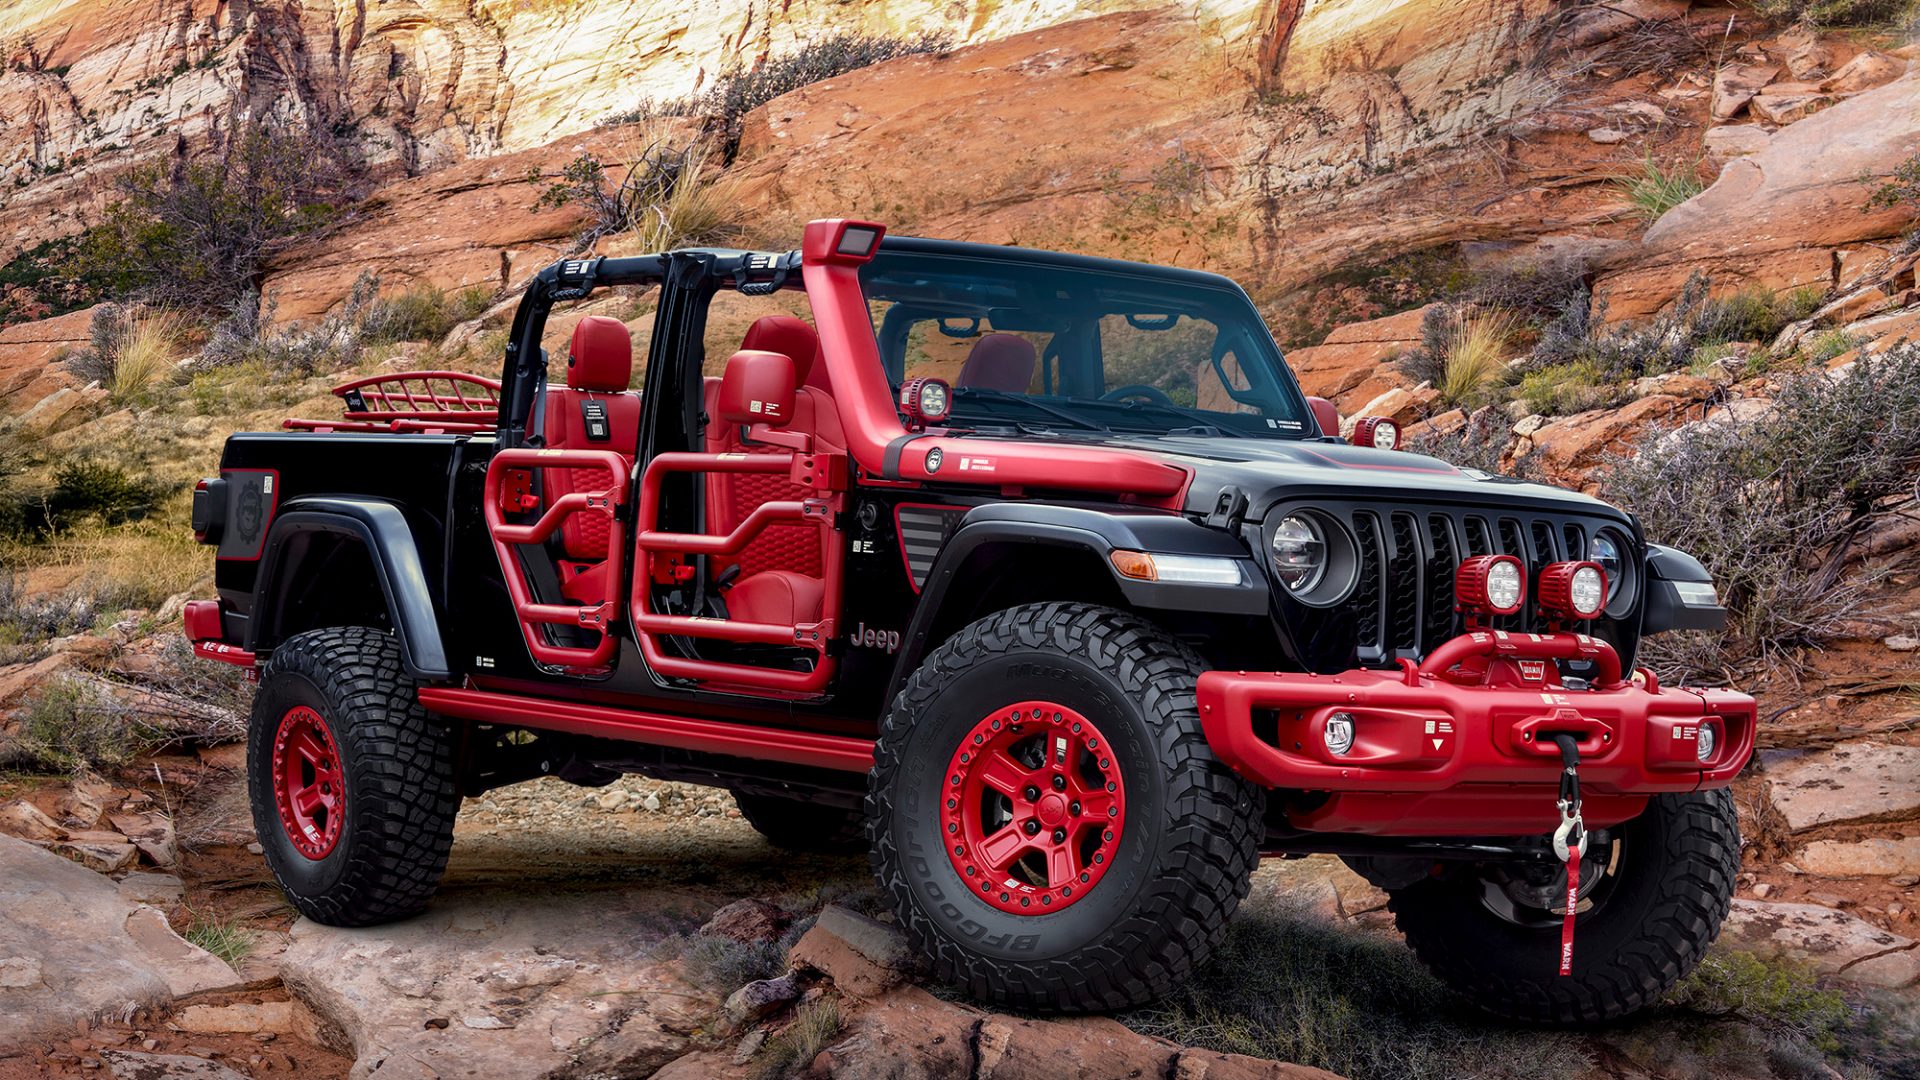 Jeep D-Coder Concept from JPP